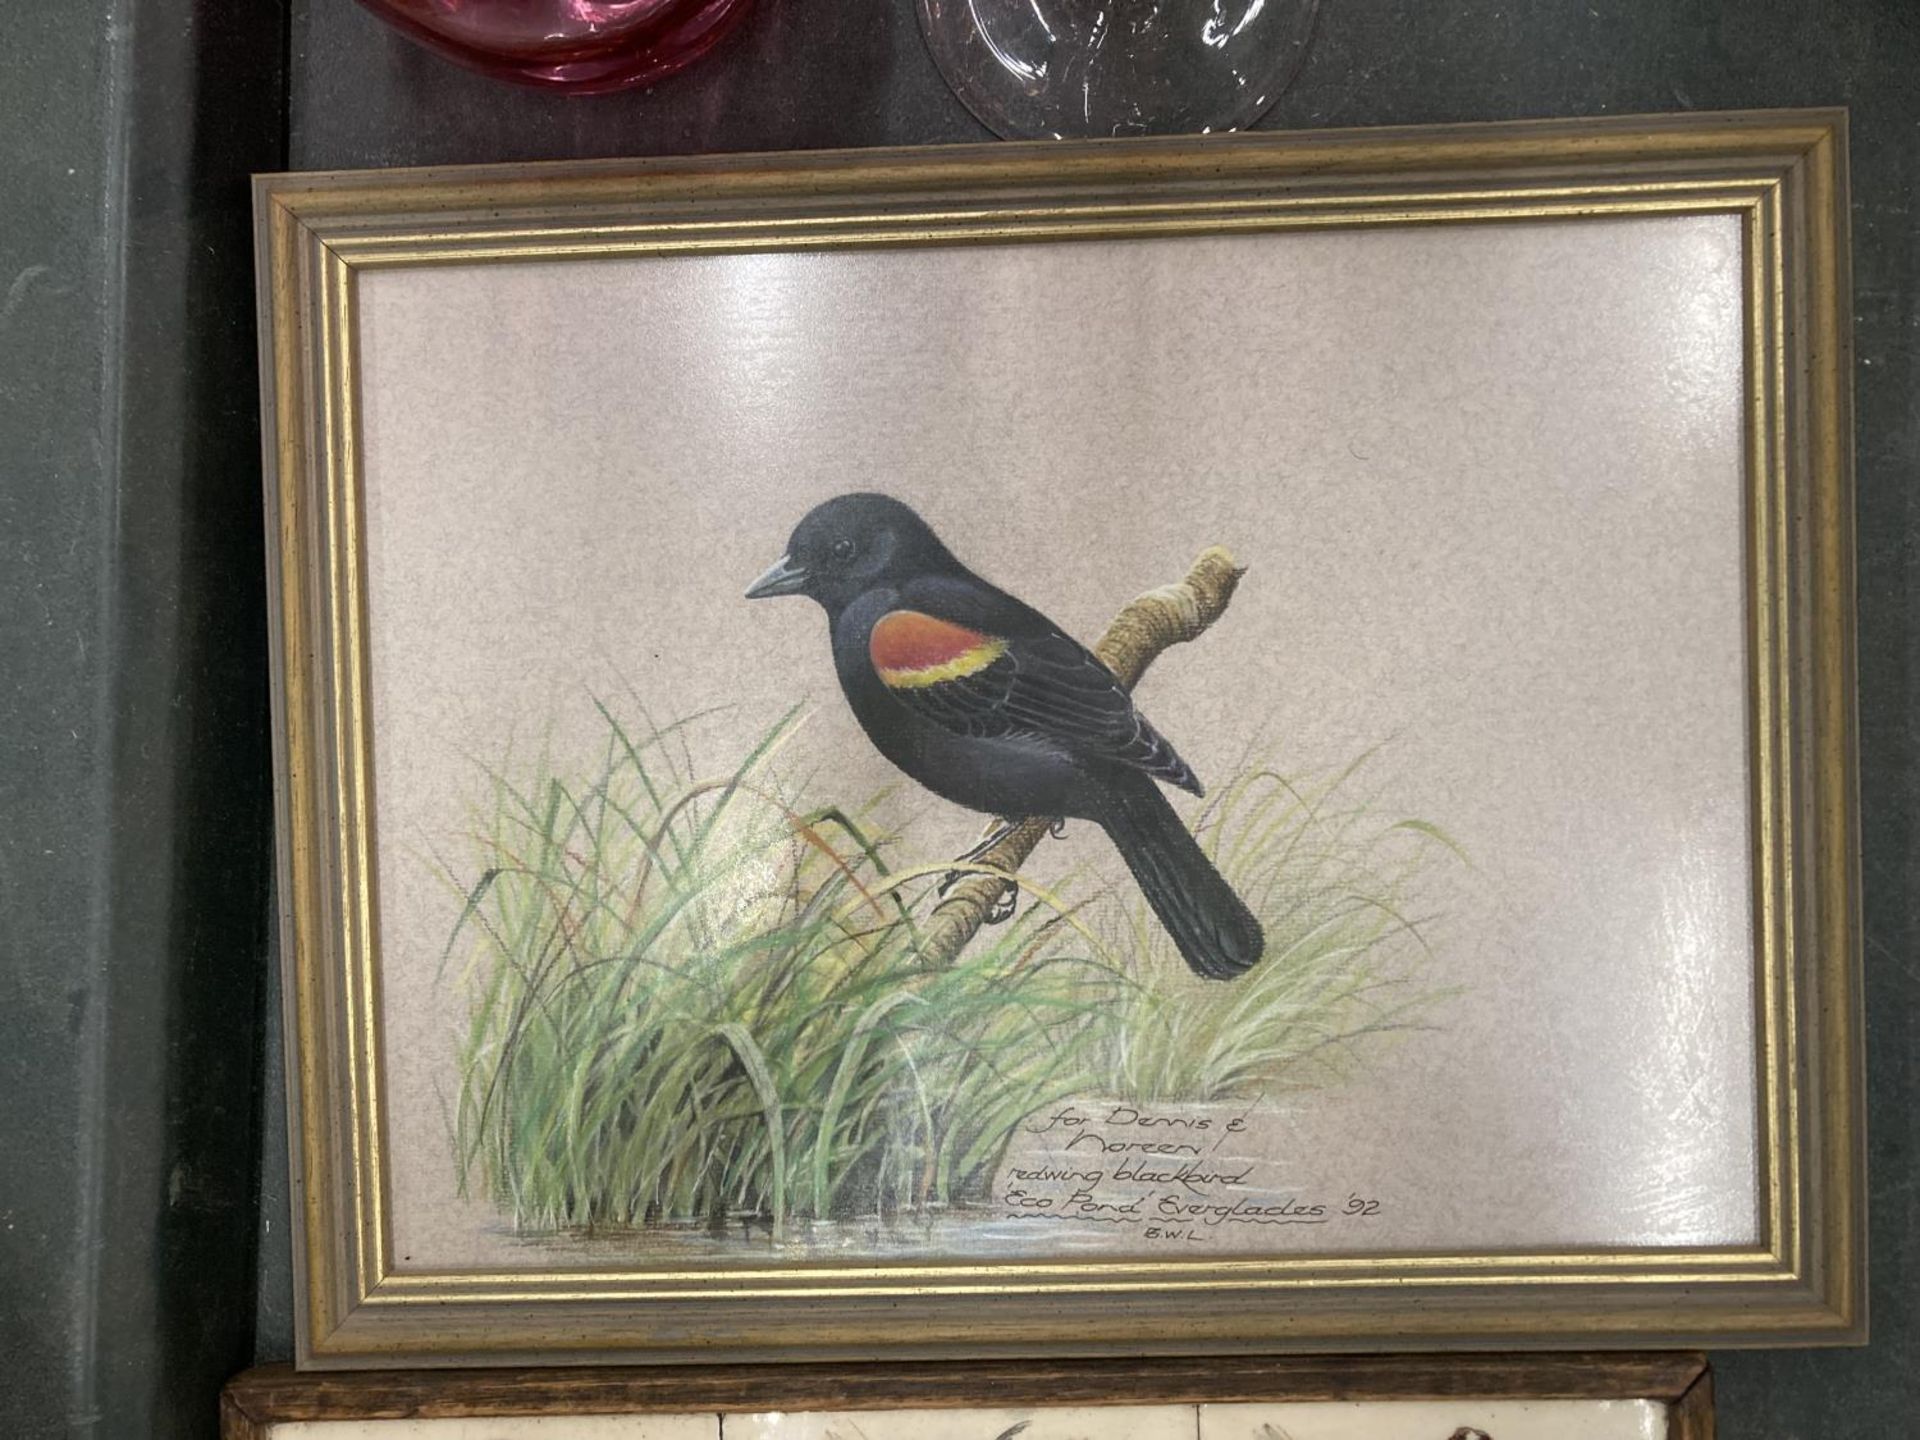 A FRAMED TILE OF A REDWING BLACKBIRD AND SIX FURTHER TILES IN A FRAME - Image 3 of 3